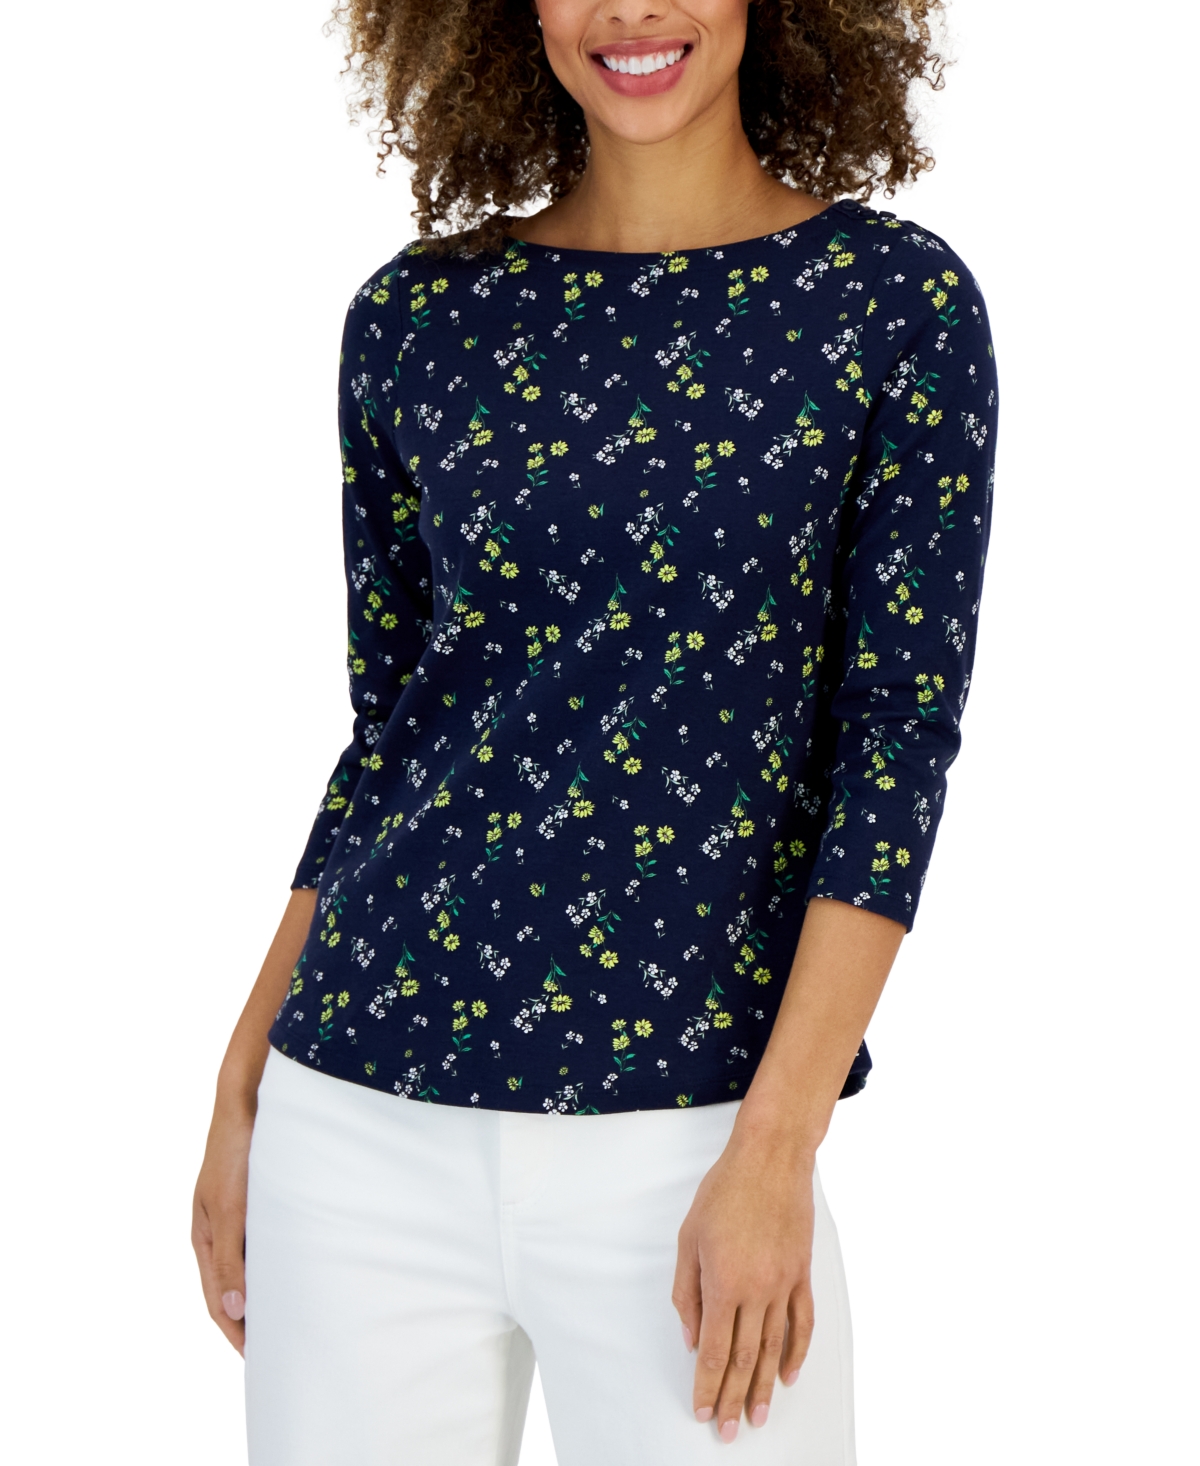 | Smart Floral Macy\'s Top, for Charter Women\'s Closet Created 3/4-Sleeve Club Boat-Neck